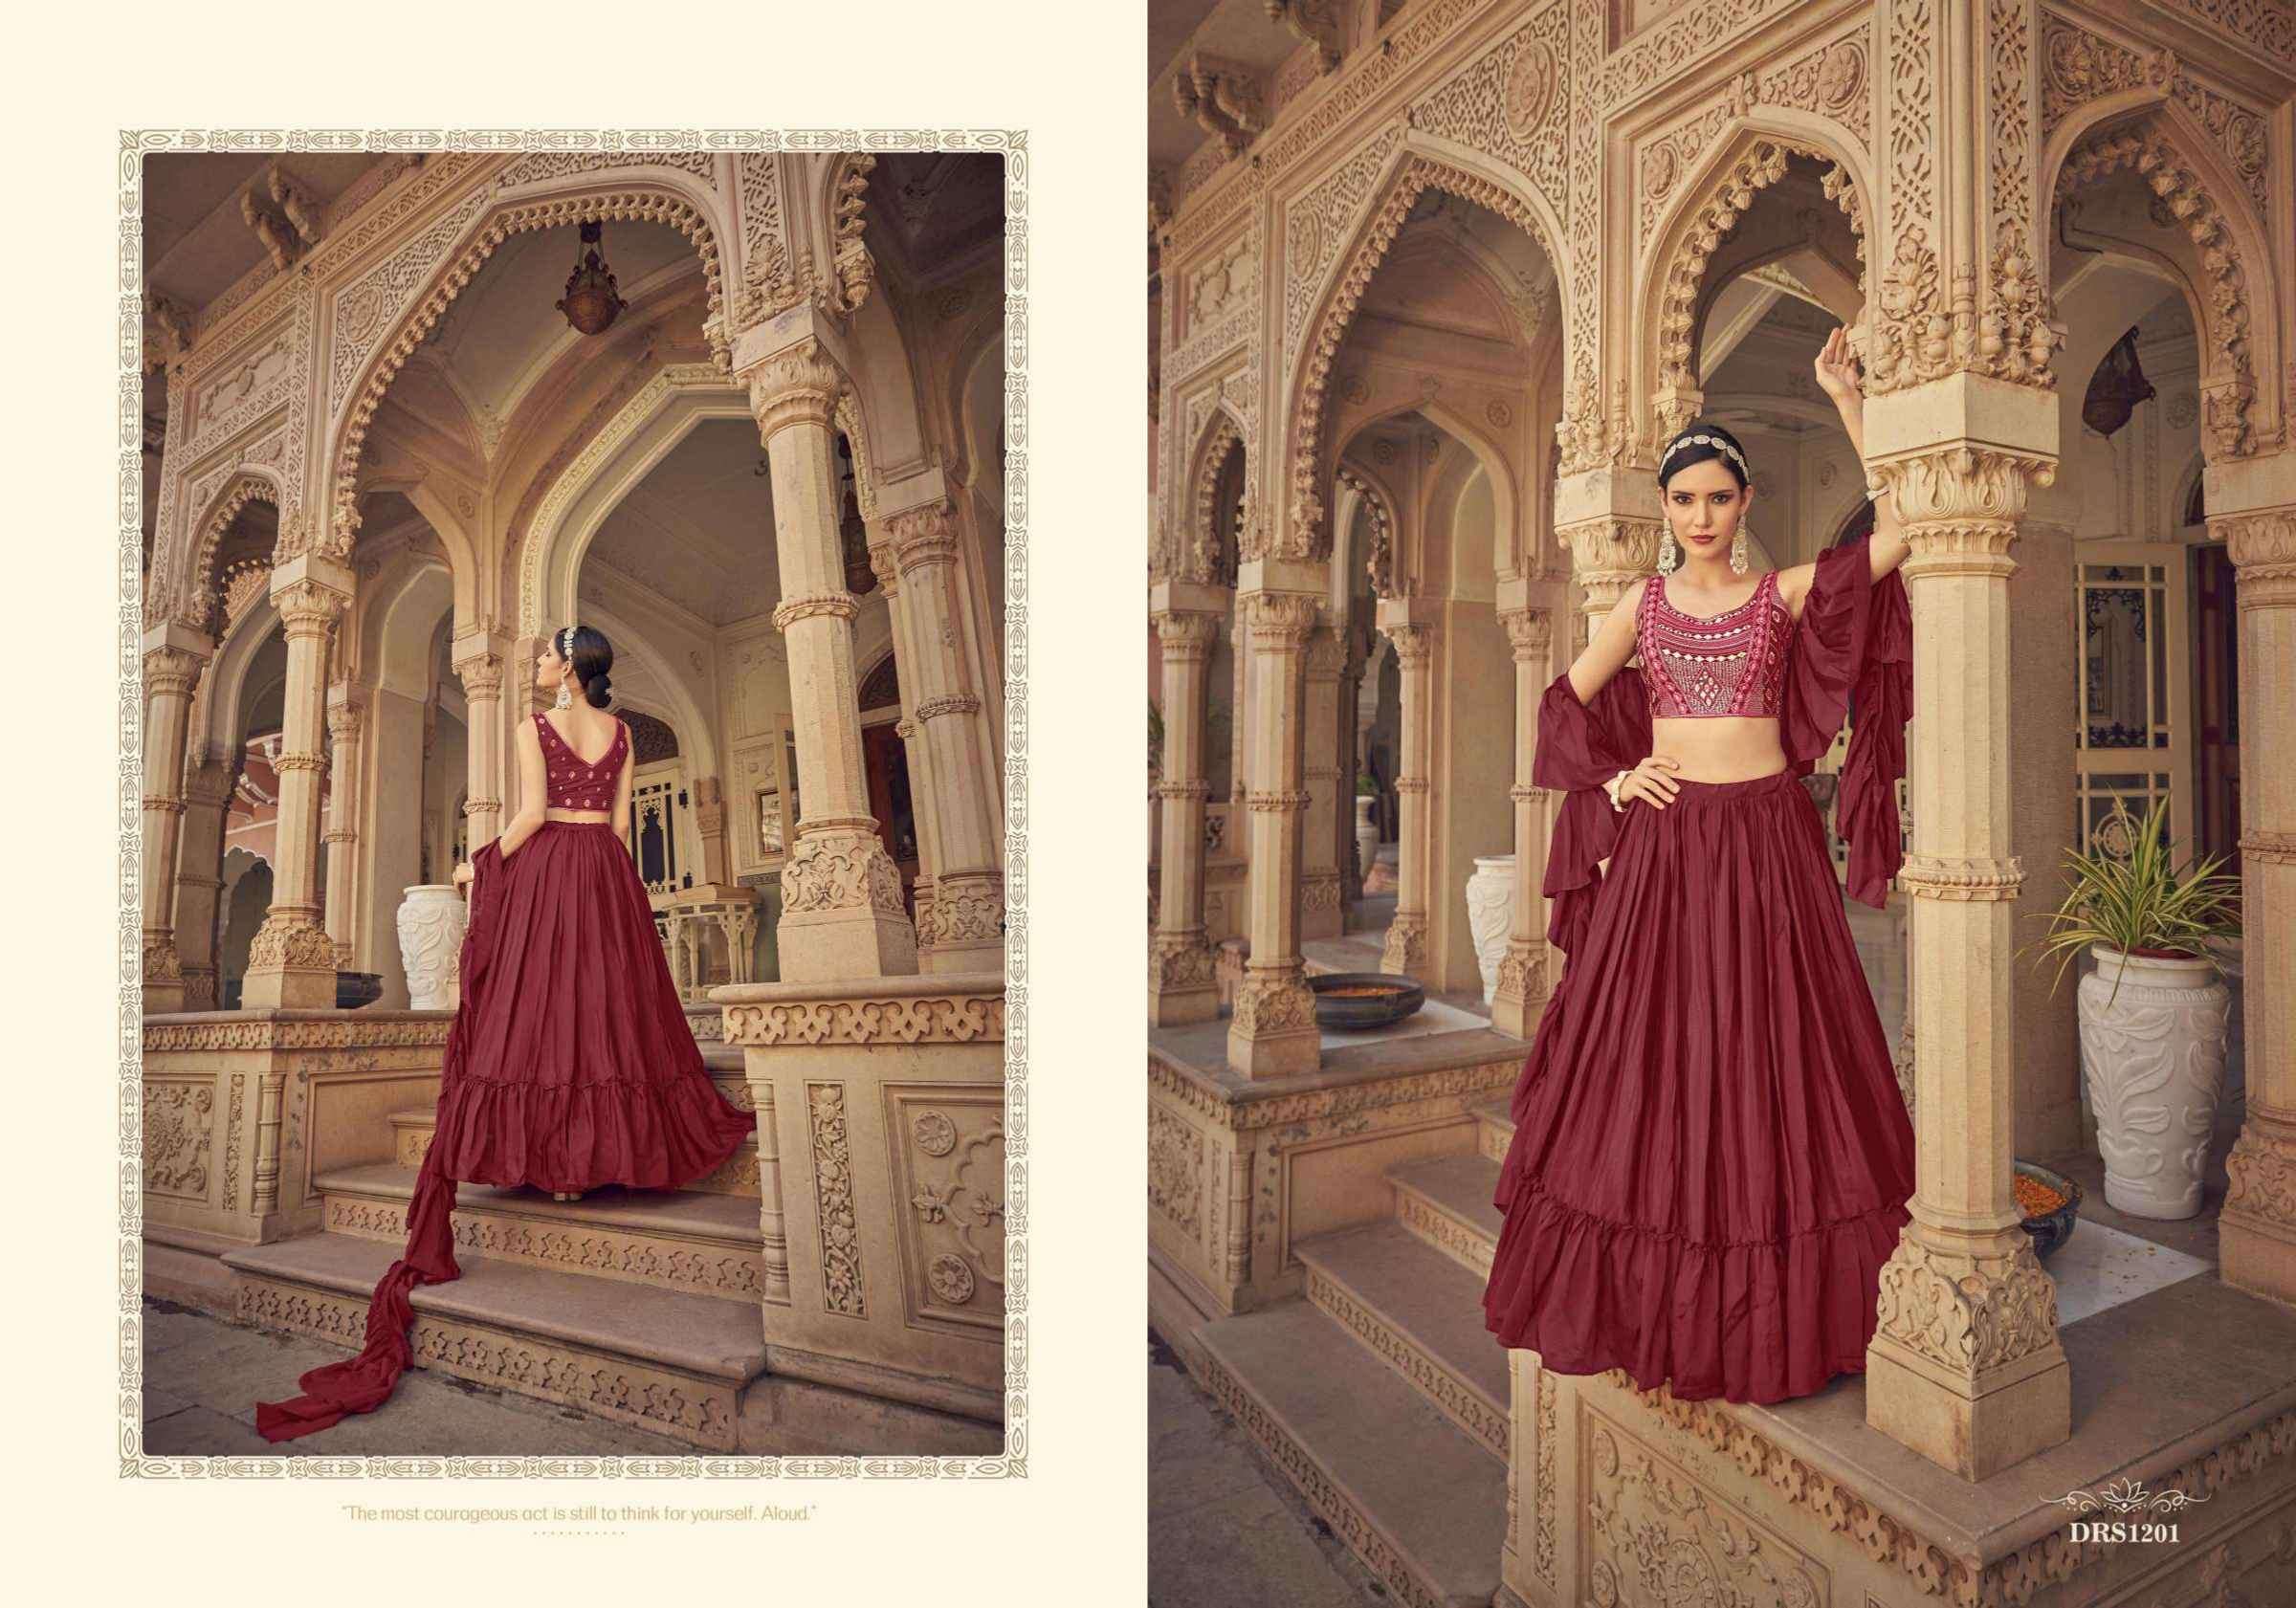 IRYA BY DRESSTIVE 1201 TO 1208 SERIES DESIGNER BEAUTIFUL NAVRATRI COLLECTION OCCASIONAL WEAR & PARTY WEAR CHINNON LEHENGAS AT WHOLESALE PRICE